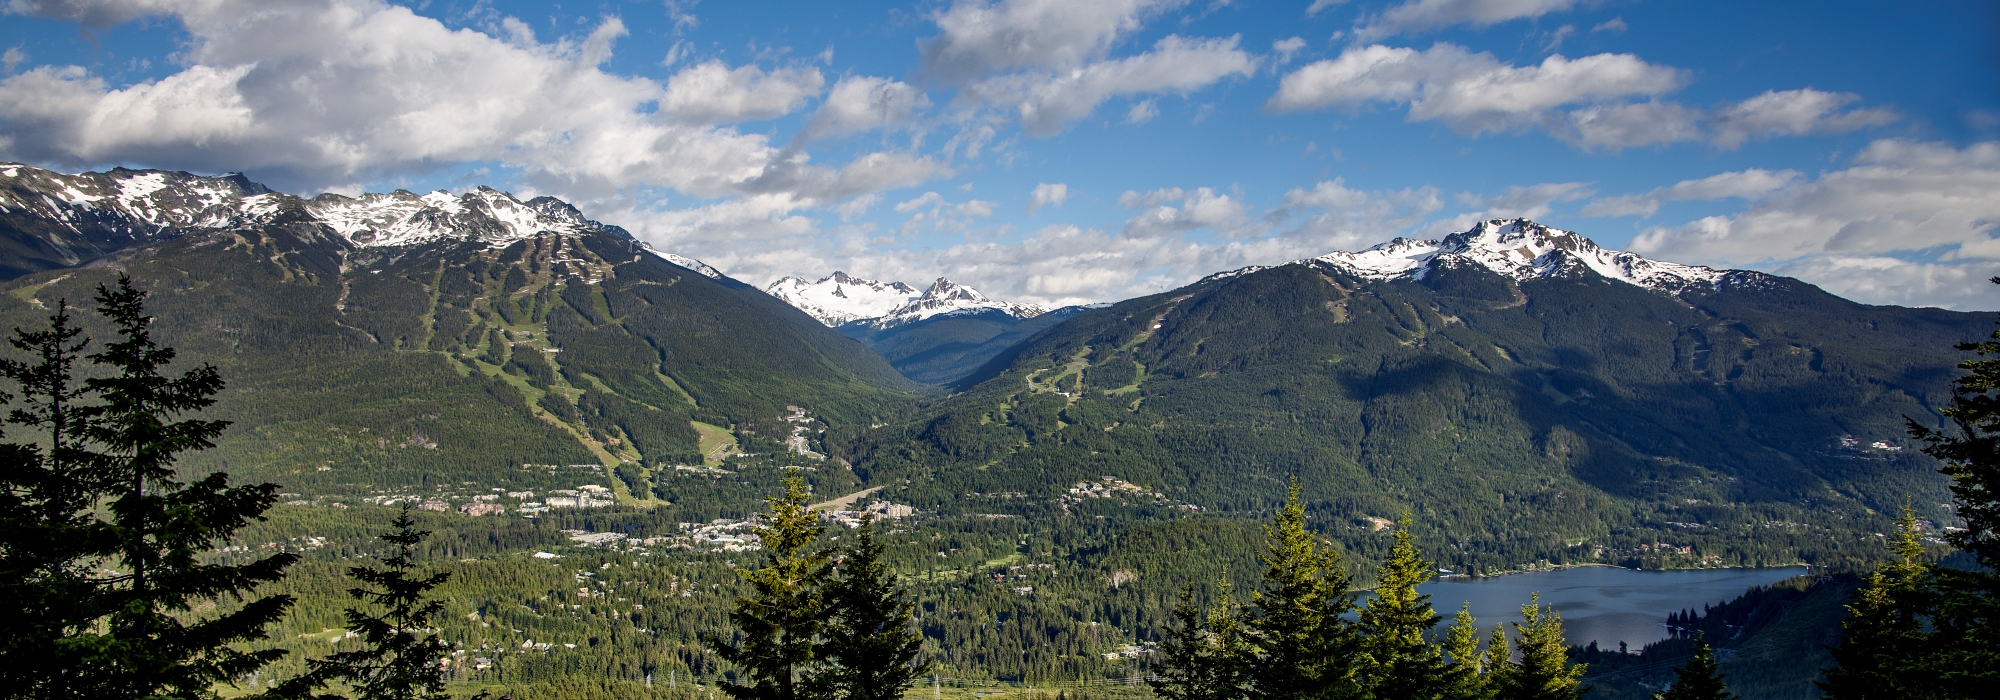 About Tourism Whistler